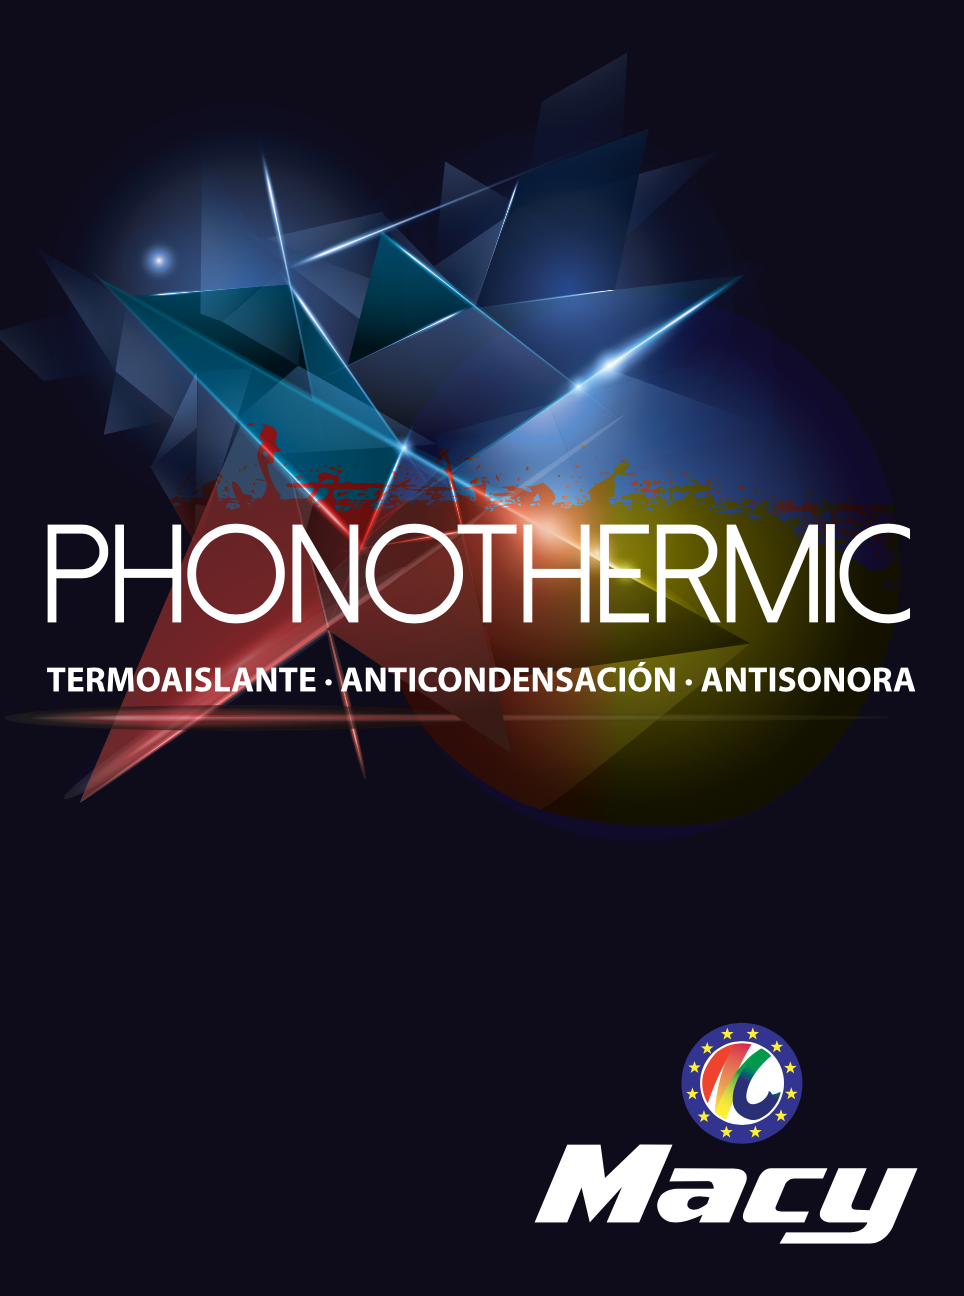 Phonothermic, the best option for energetic efficiency